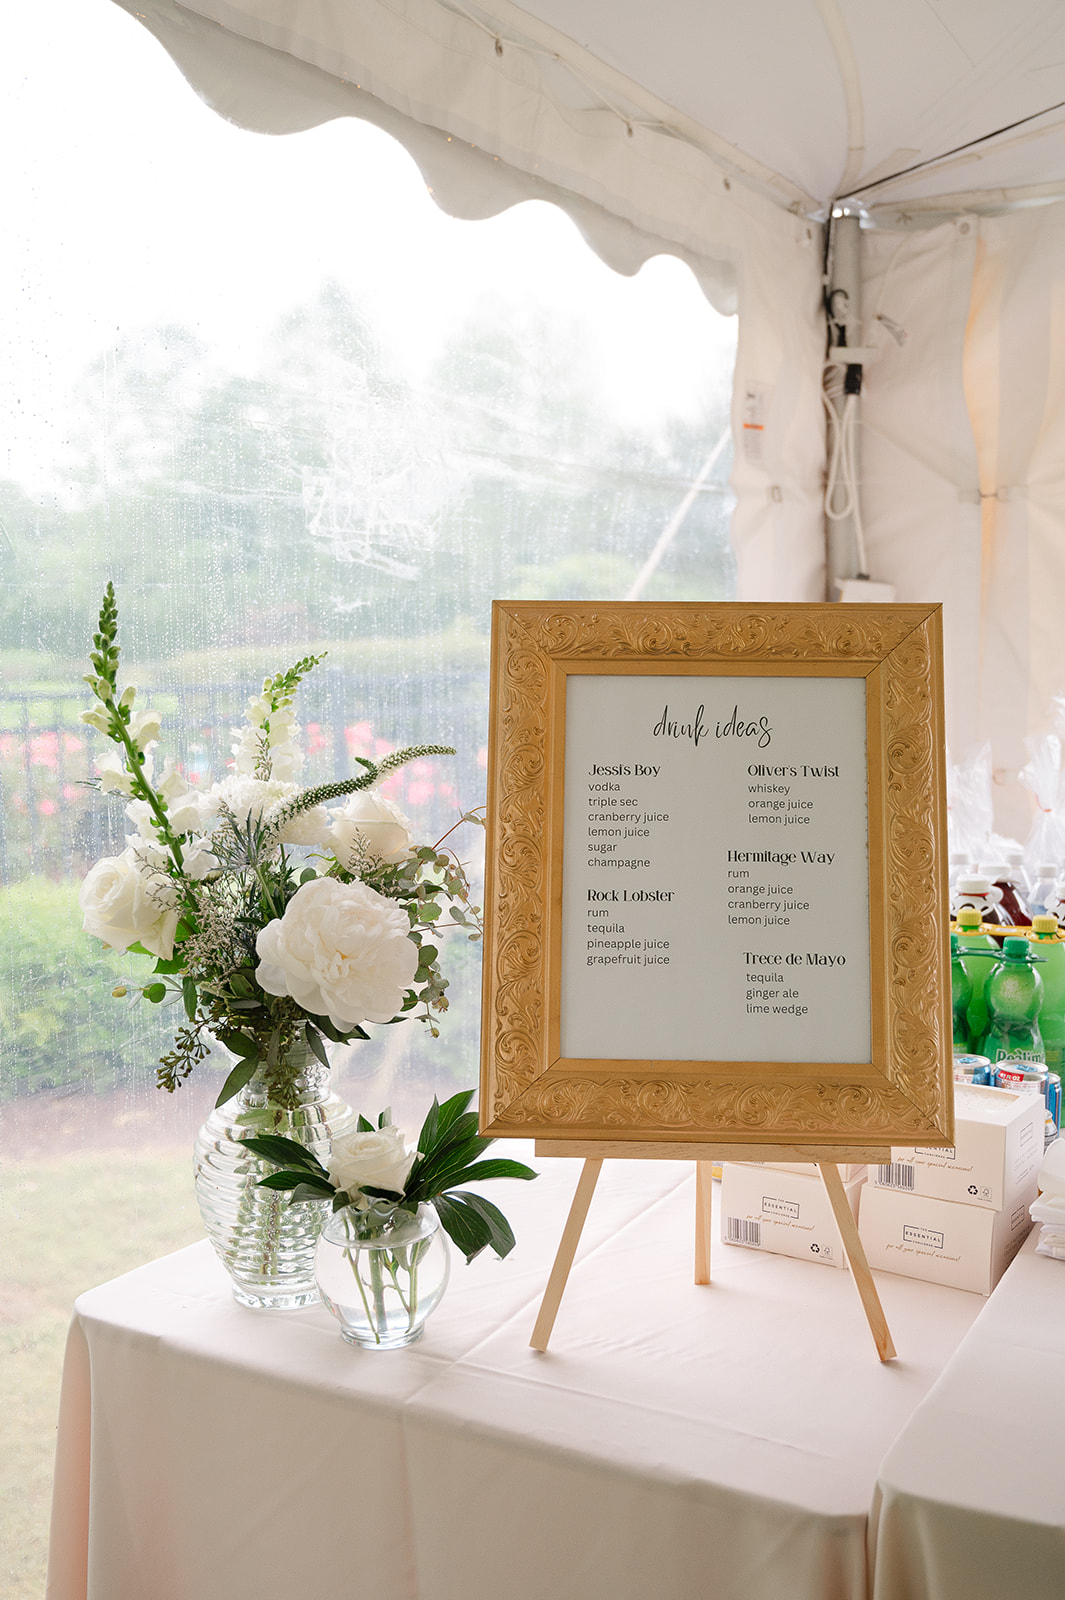 The details of Oliver & Jess' wedding day in Milton, DE were absolutely beautiful.